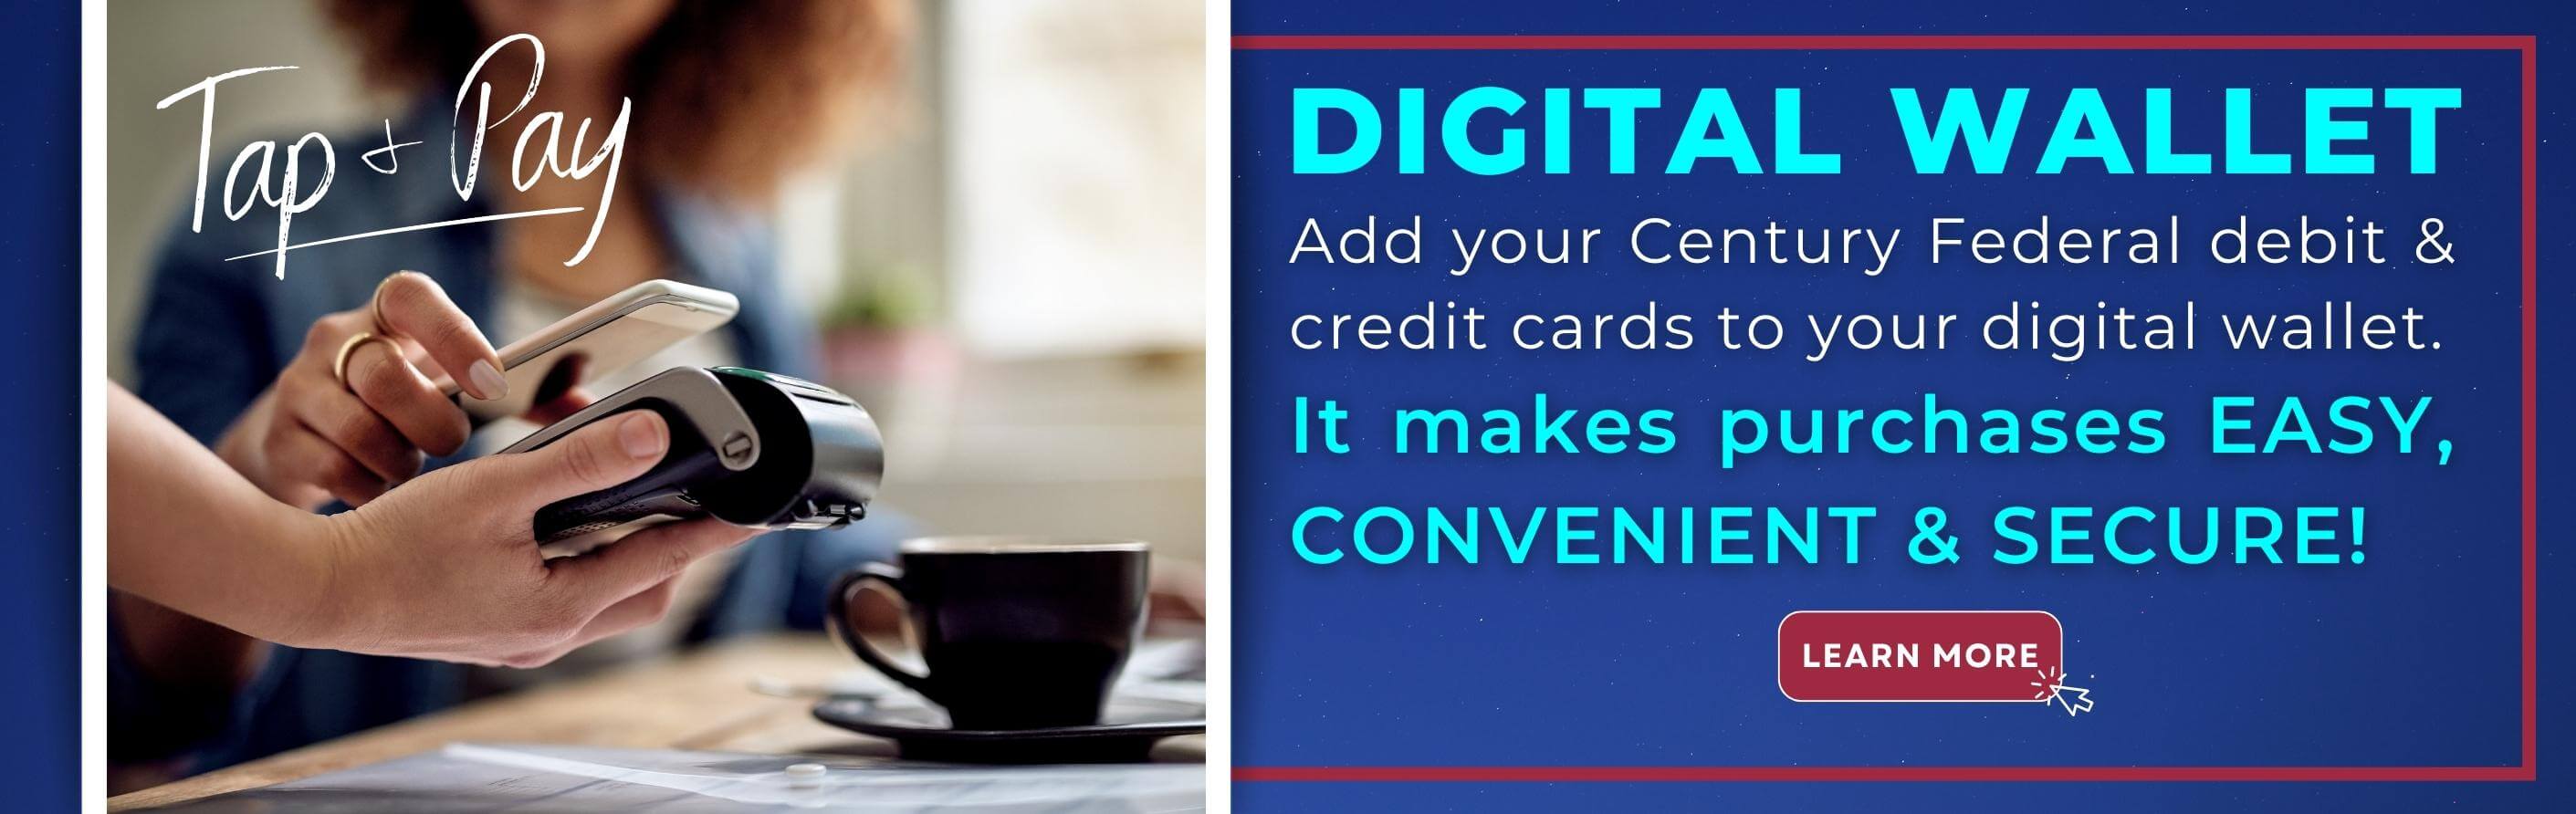 Digital Wallet - Add your Century Federal debit and credit cards to your digital wallet!